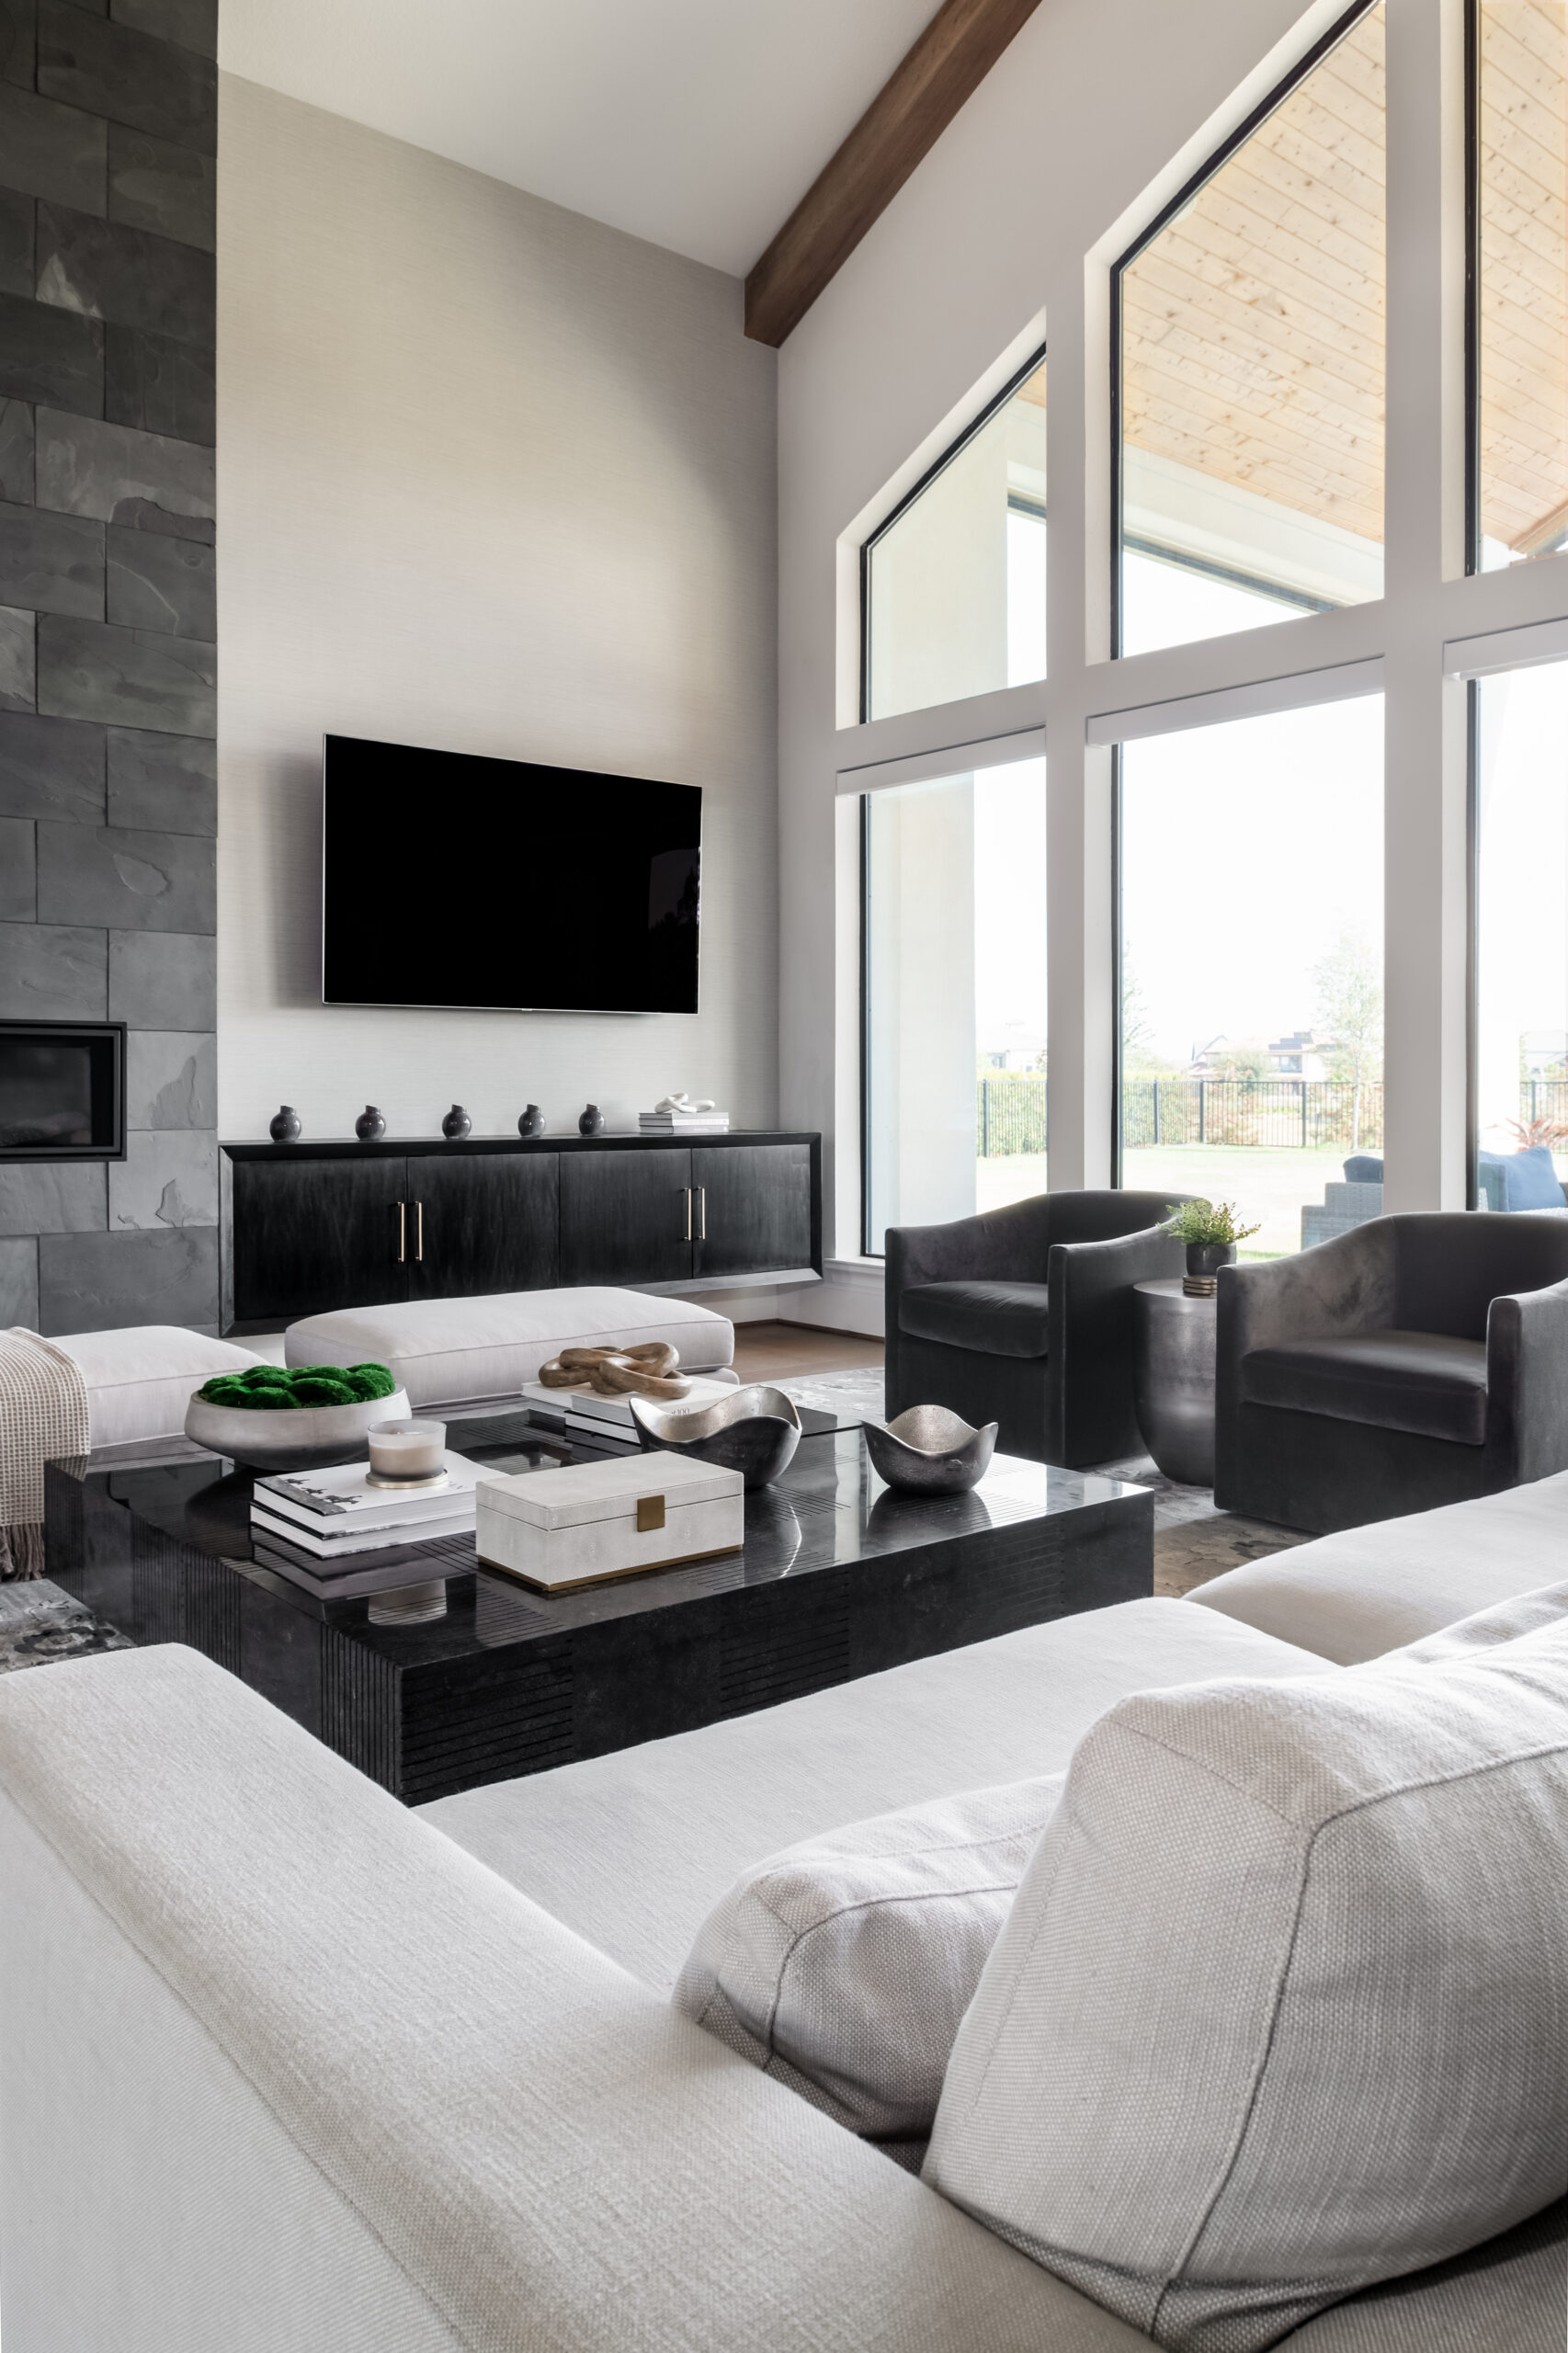 Modern interior design photos of living room with black and white furniture